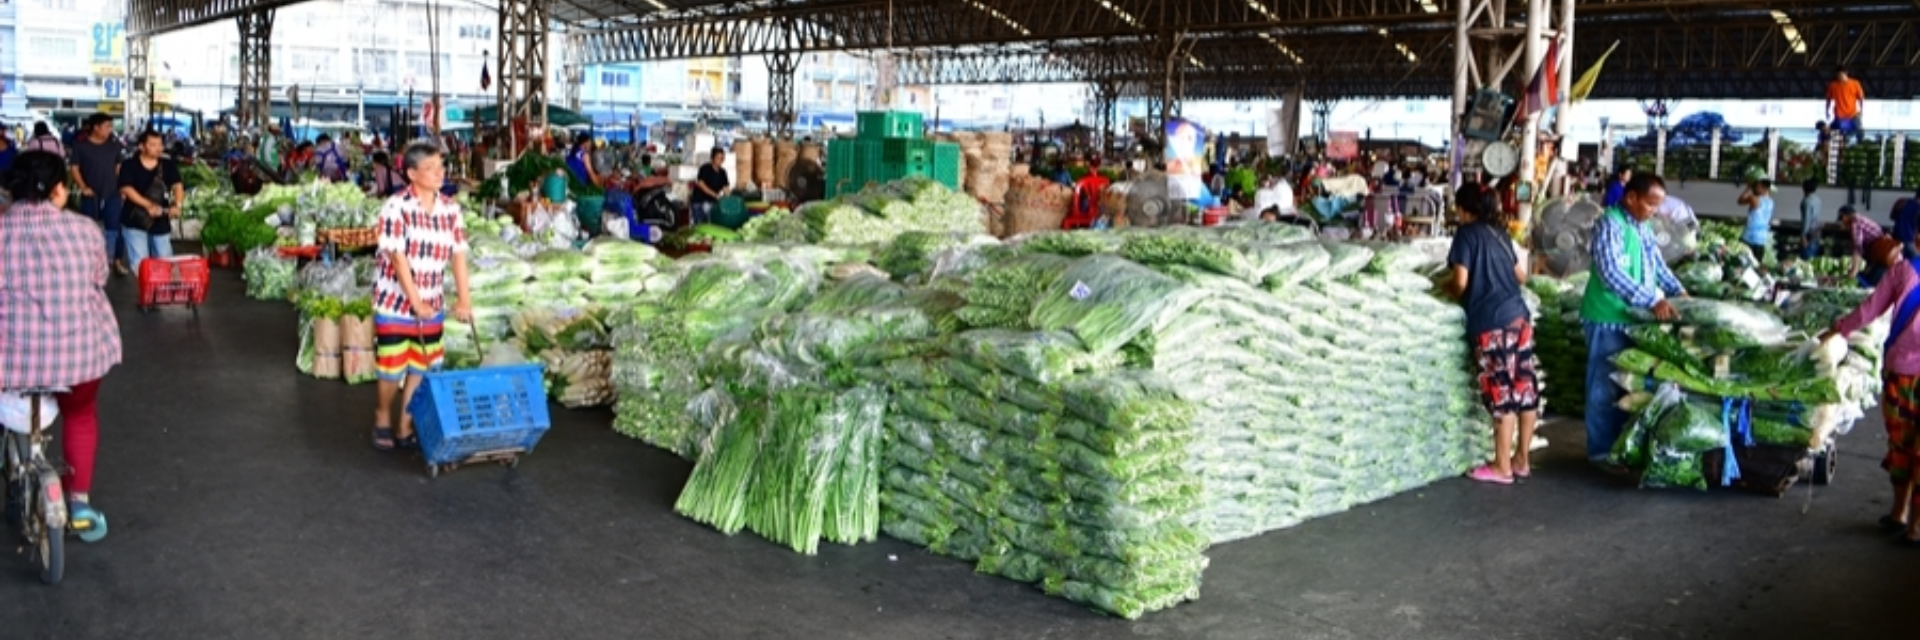 MARKET SRI MUANG THONG MARKET: ISAN’S MECCA OF FRUITS AND VEGETABLES